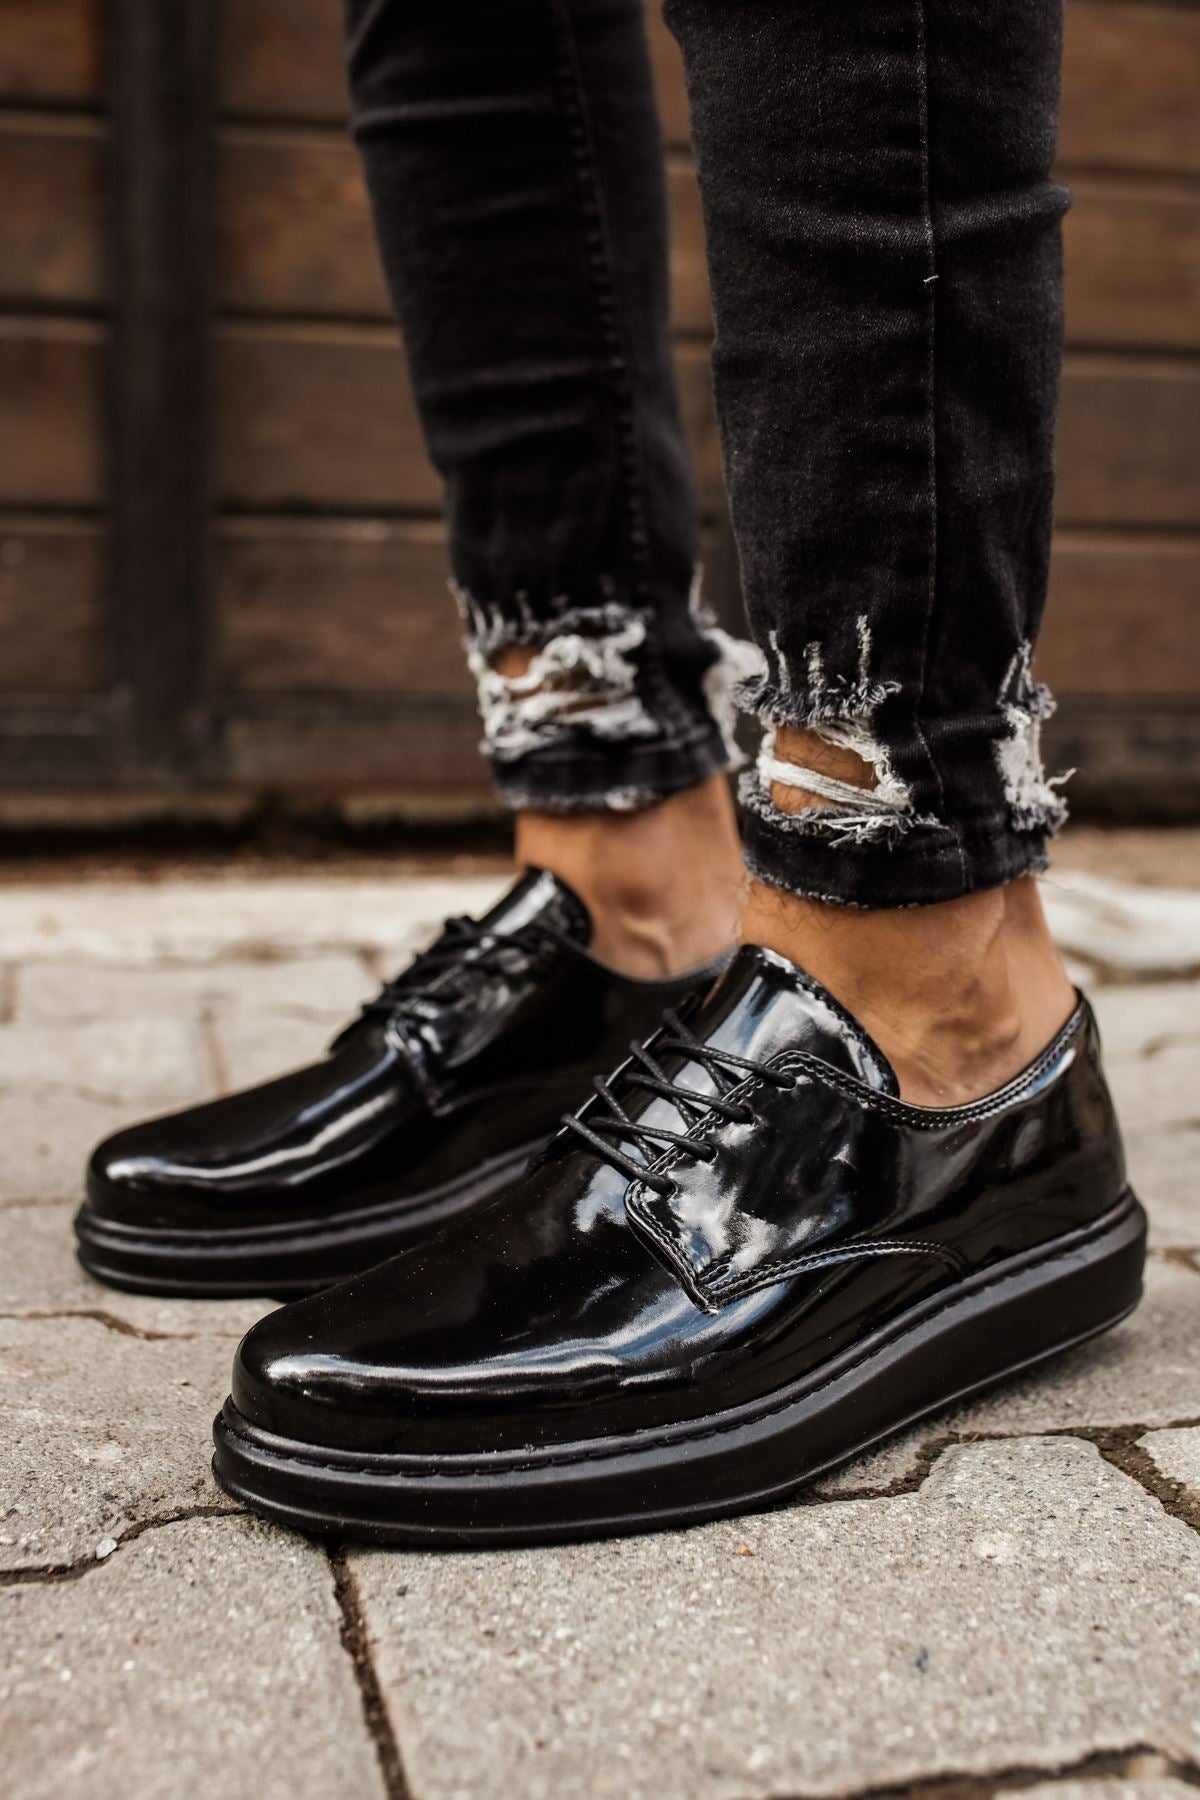 CH003 Men's Full Black Patent Leather Casual Classic Sneaker Shoes - STREETMODE ™